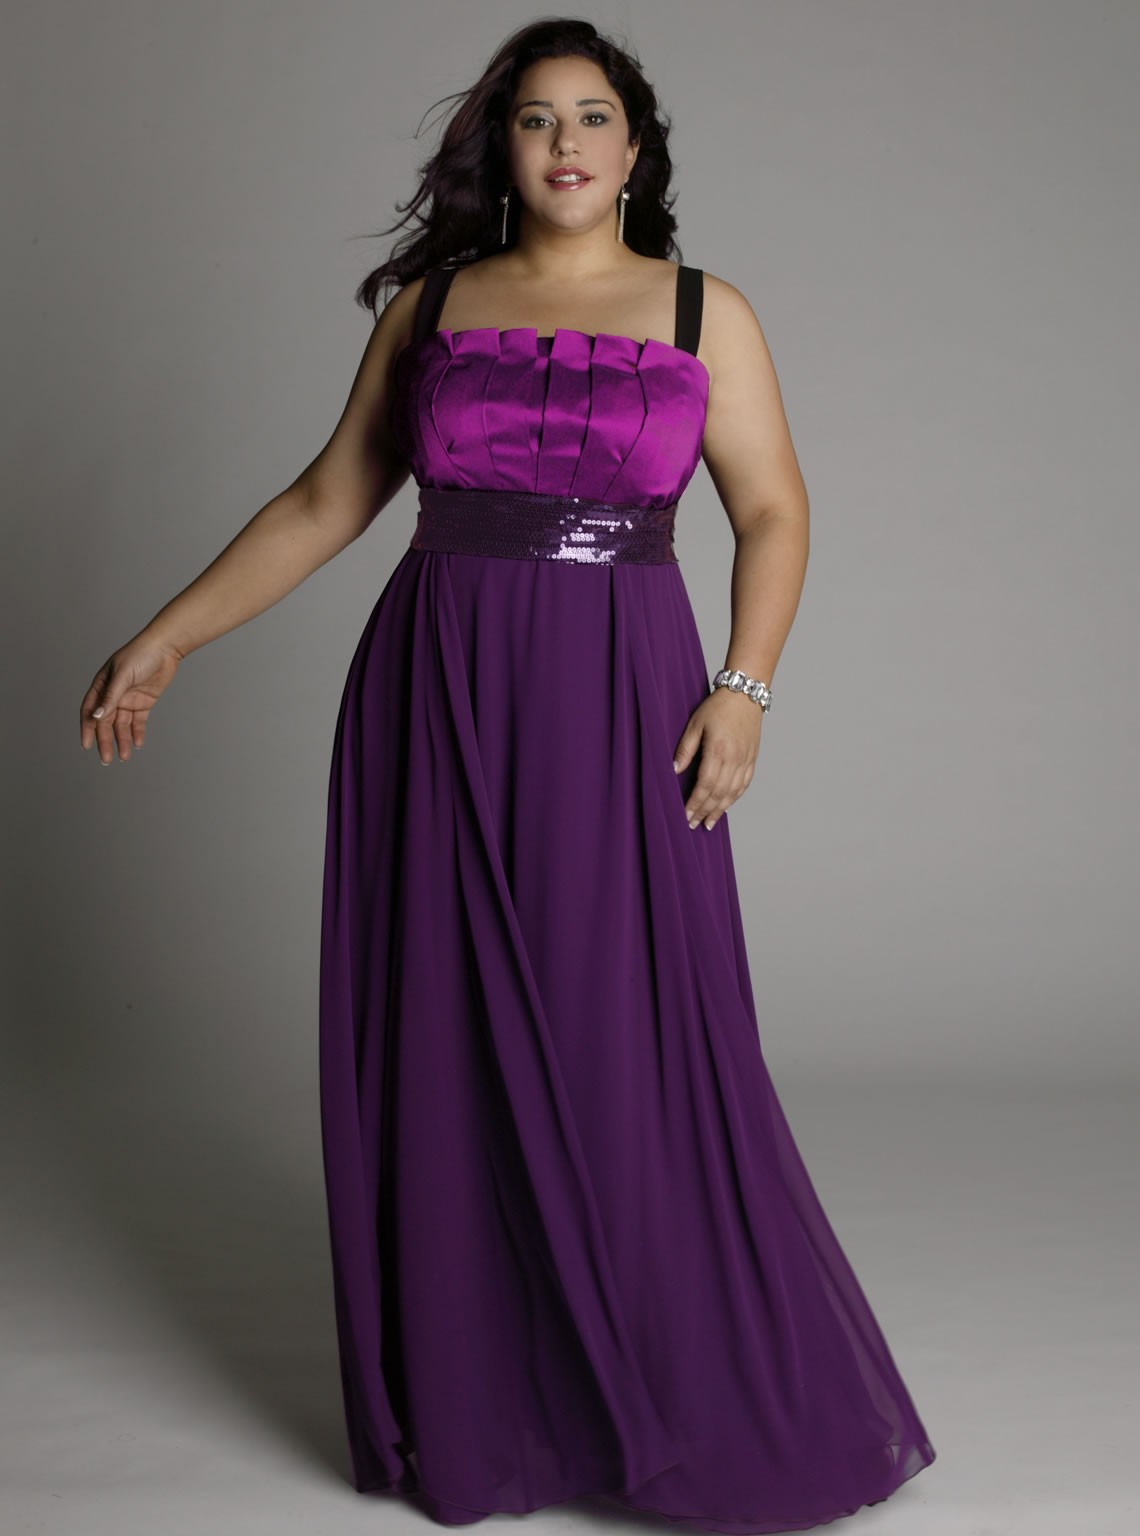 Party Dresses For Larger Sizes - Make You Look Like A Princess